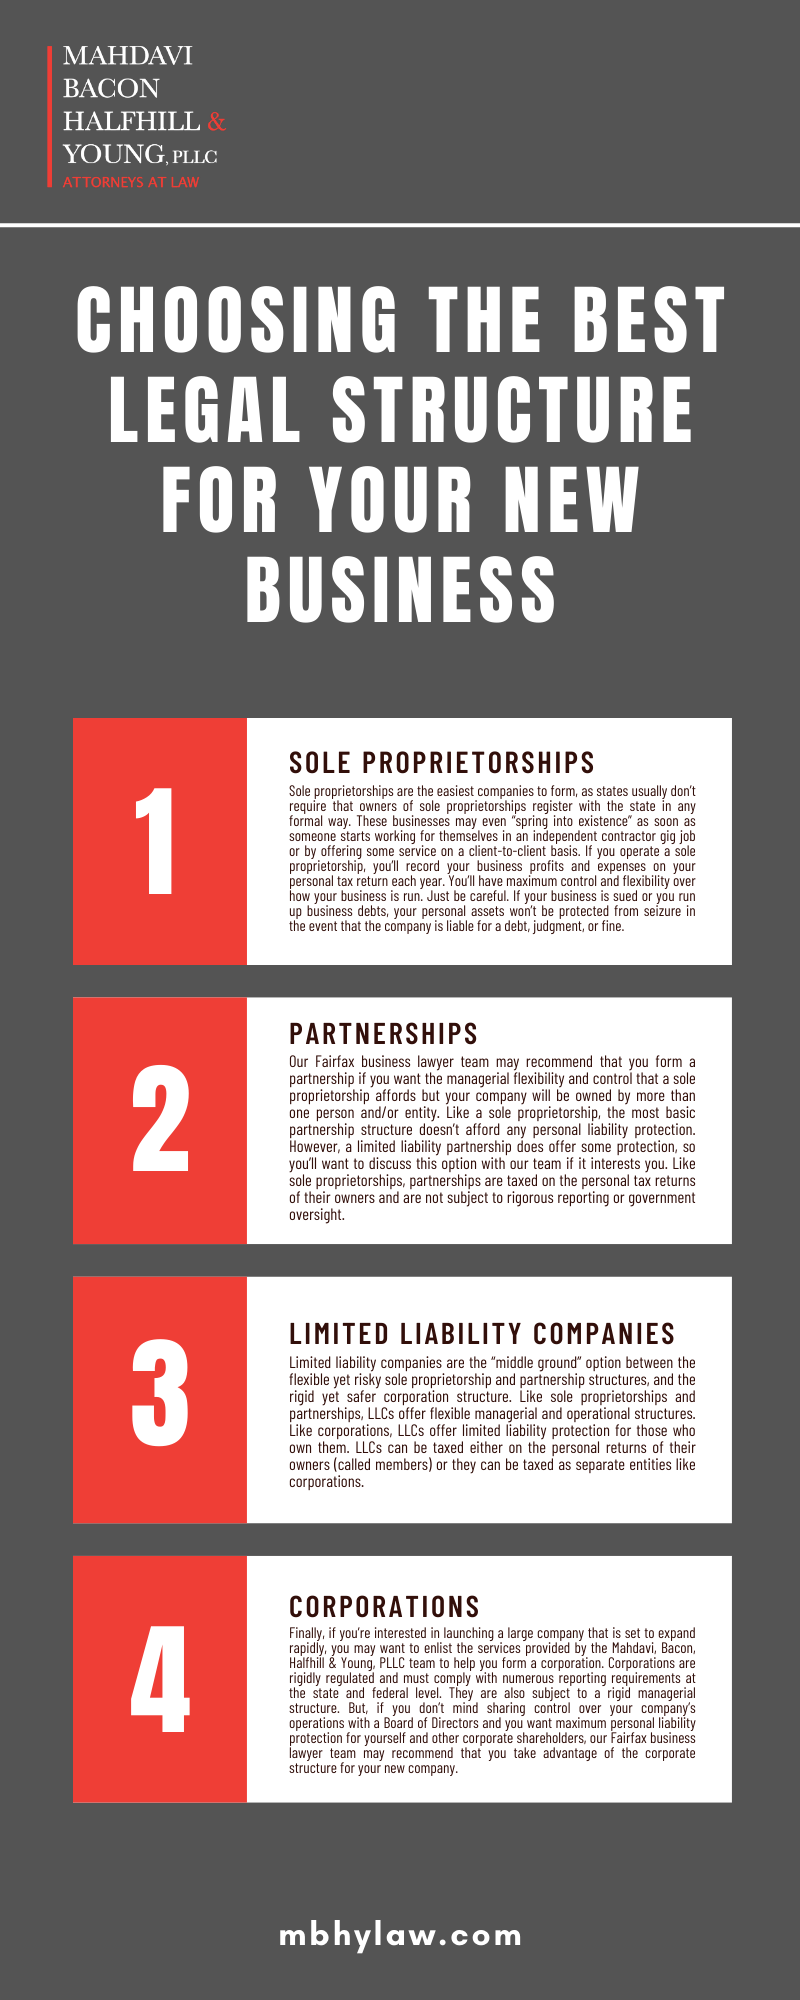 CHOOSING THE BEST LEGAL STRUCTURE FOR YOUR NEW BUSINESS INFOGRAPHIC